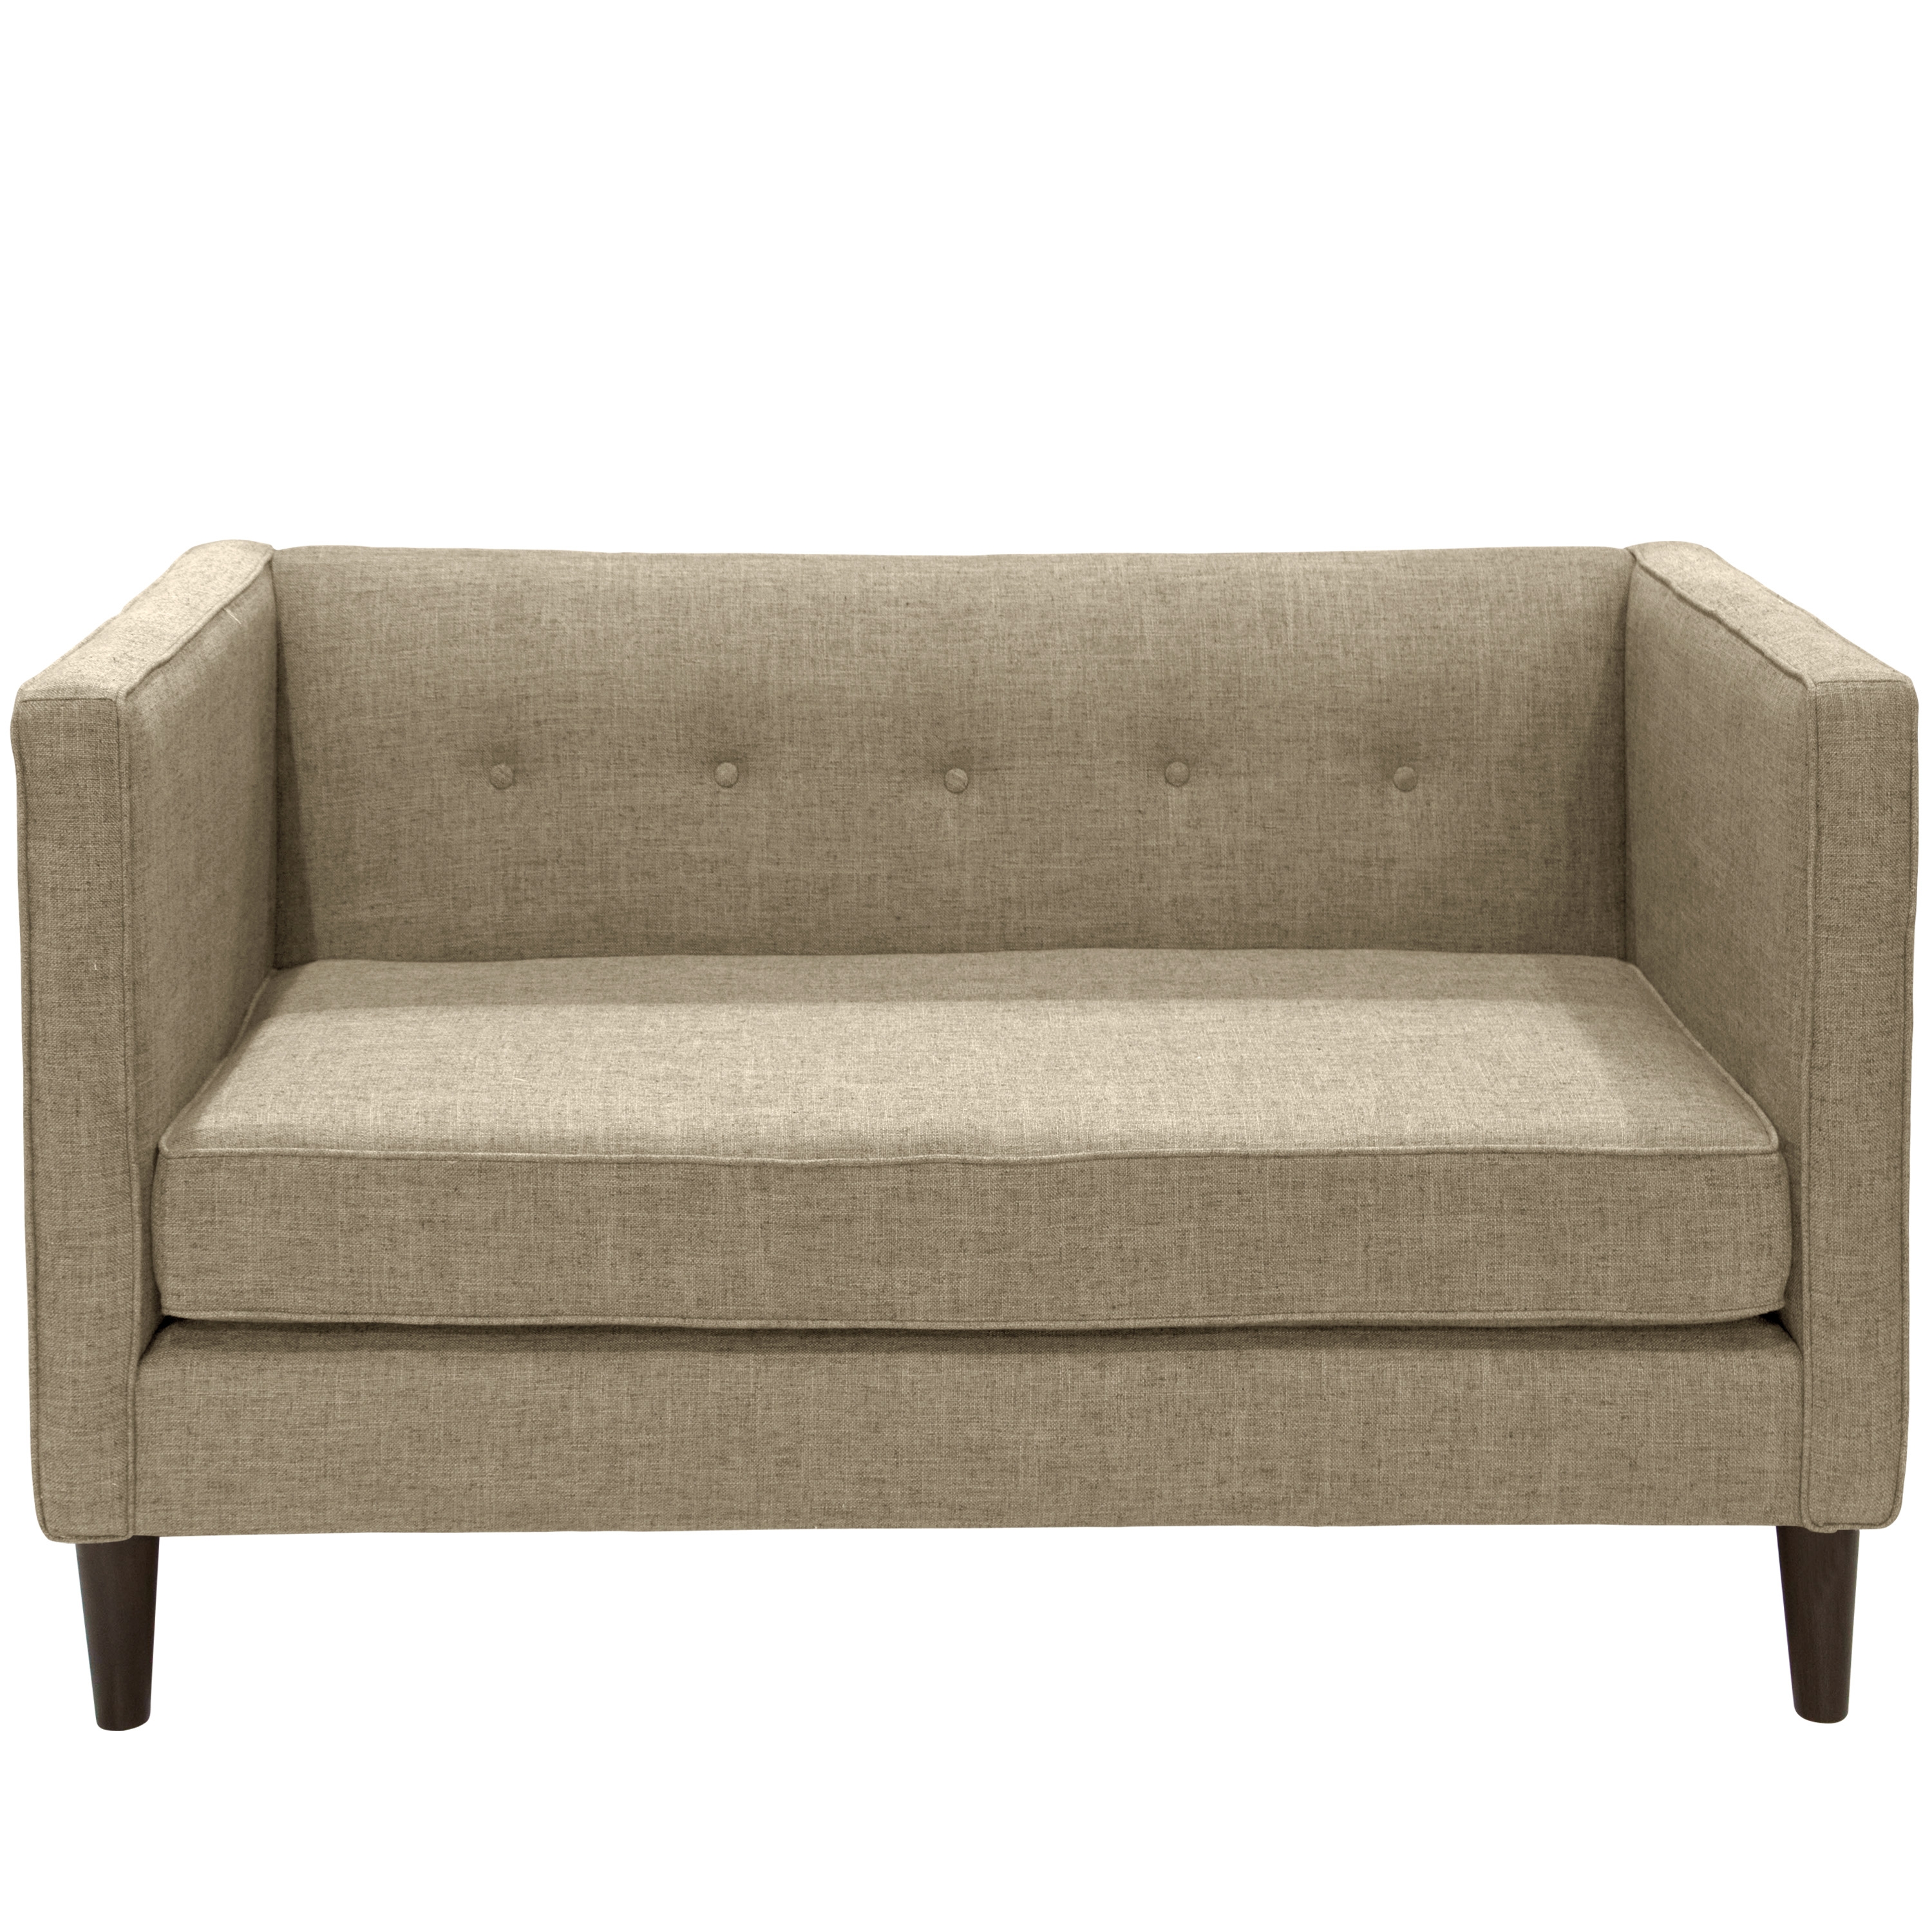 Downing Settee, Linen - DNU - Image 1